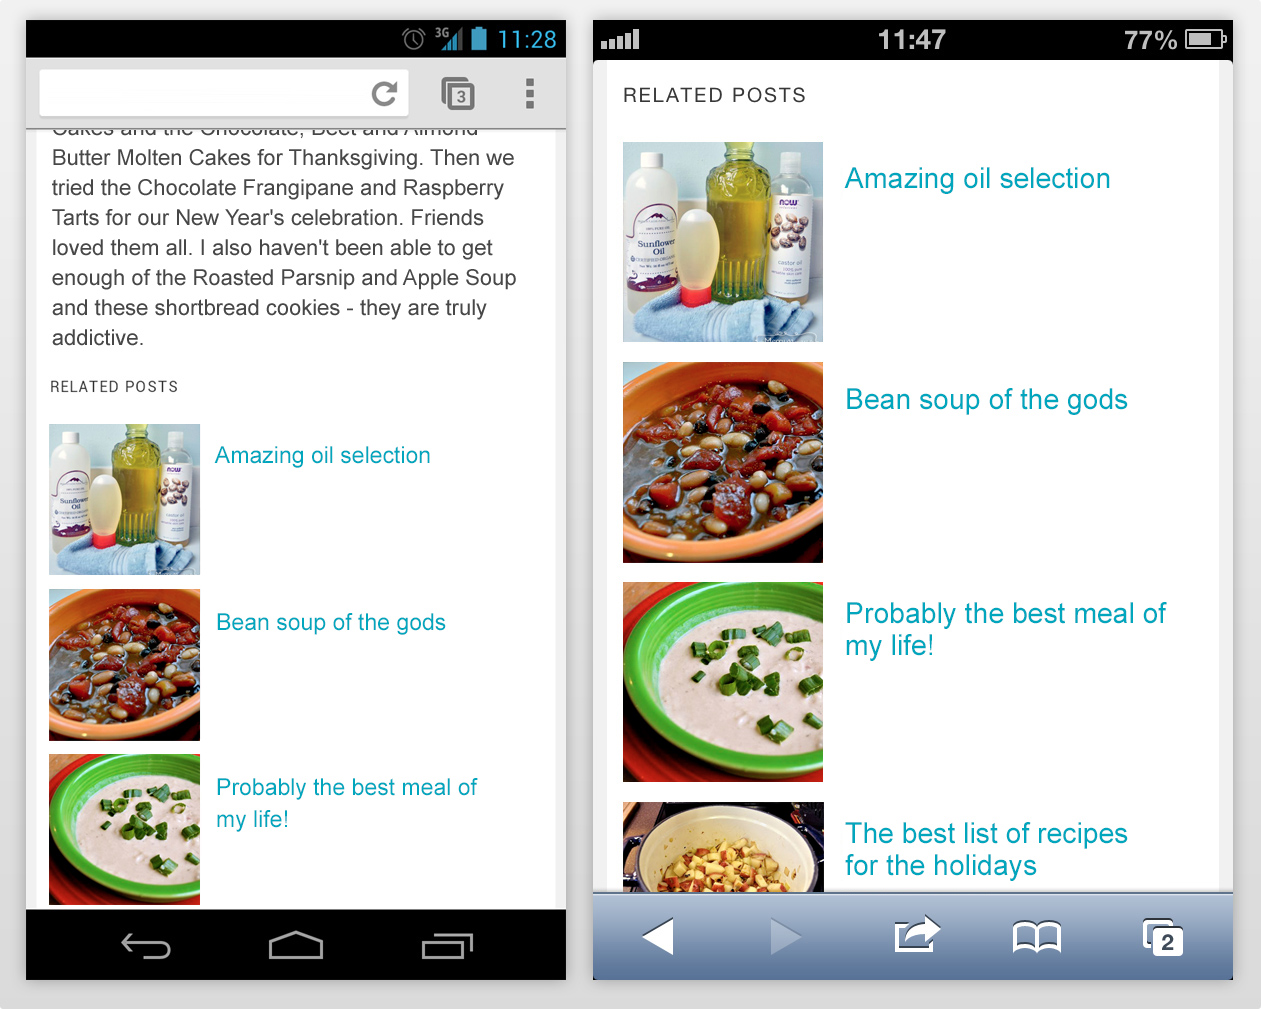 Sovrn Related Posts responsive theme on a Galaxy Nexus and iPhone 4s.